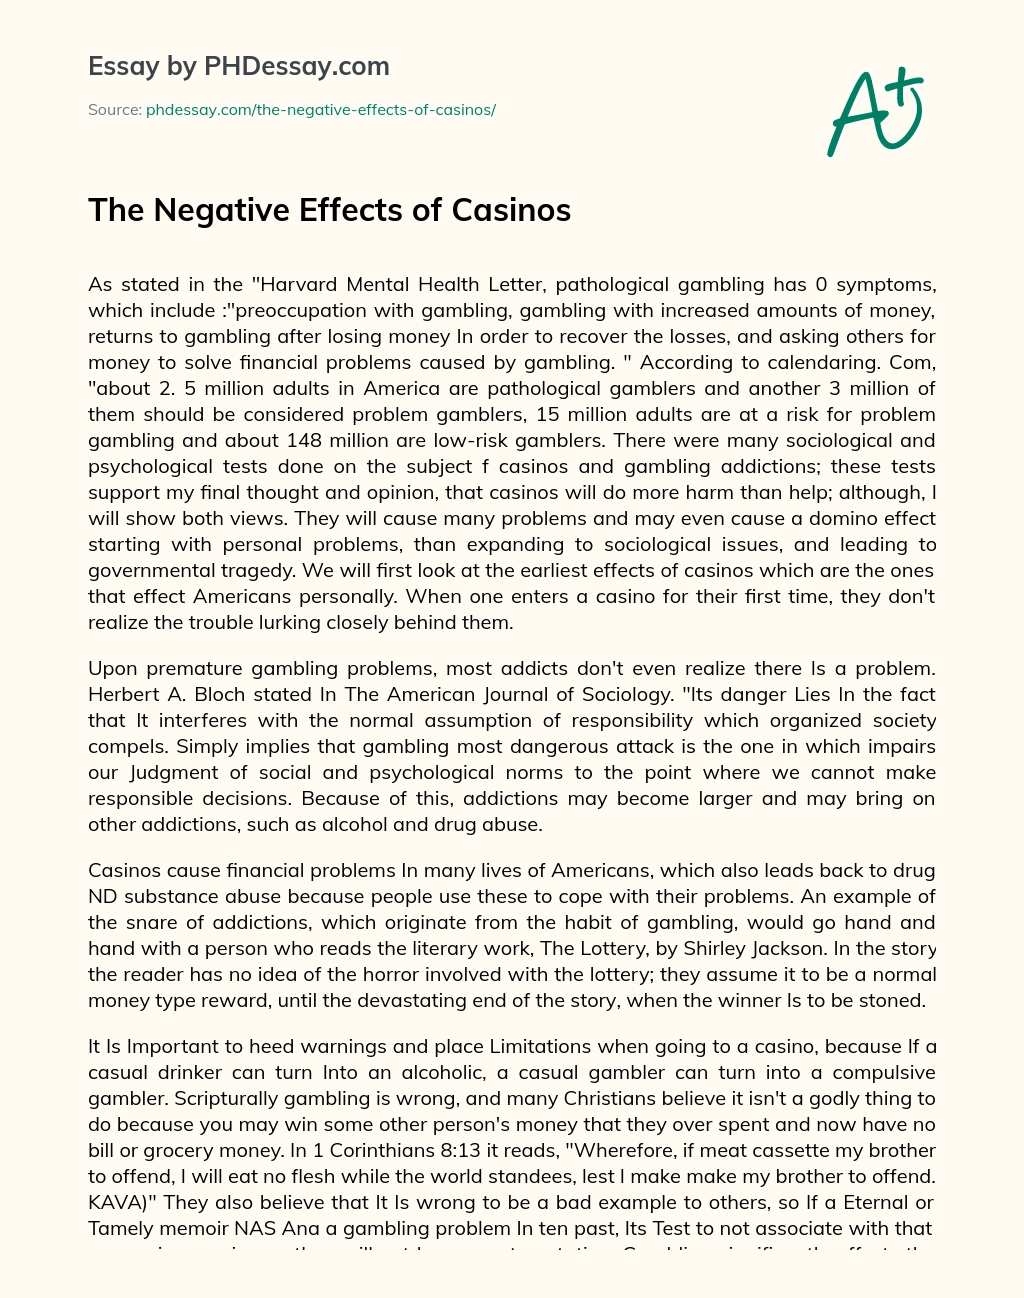 The Negative Effects of Casinos essay